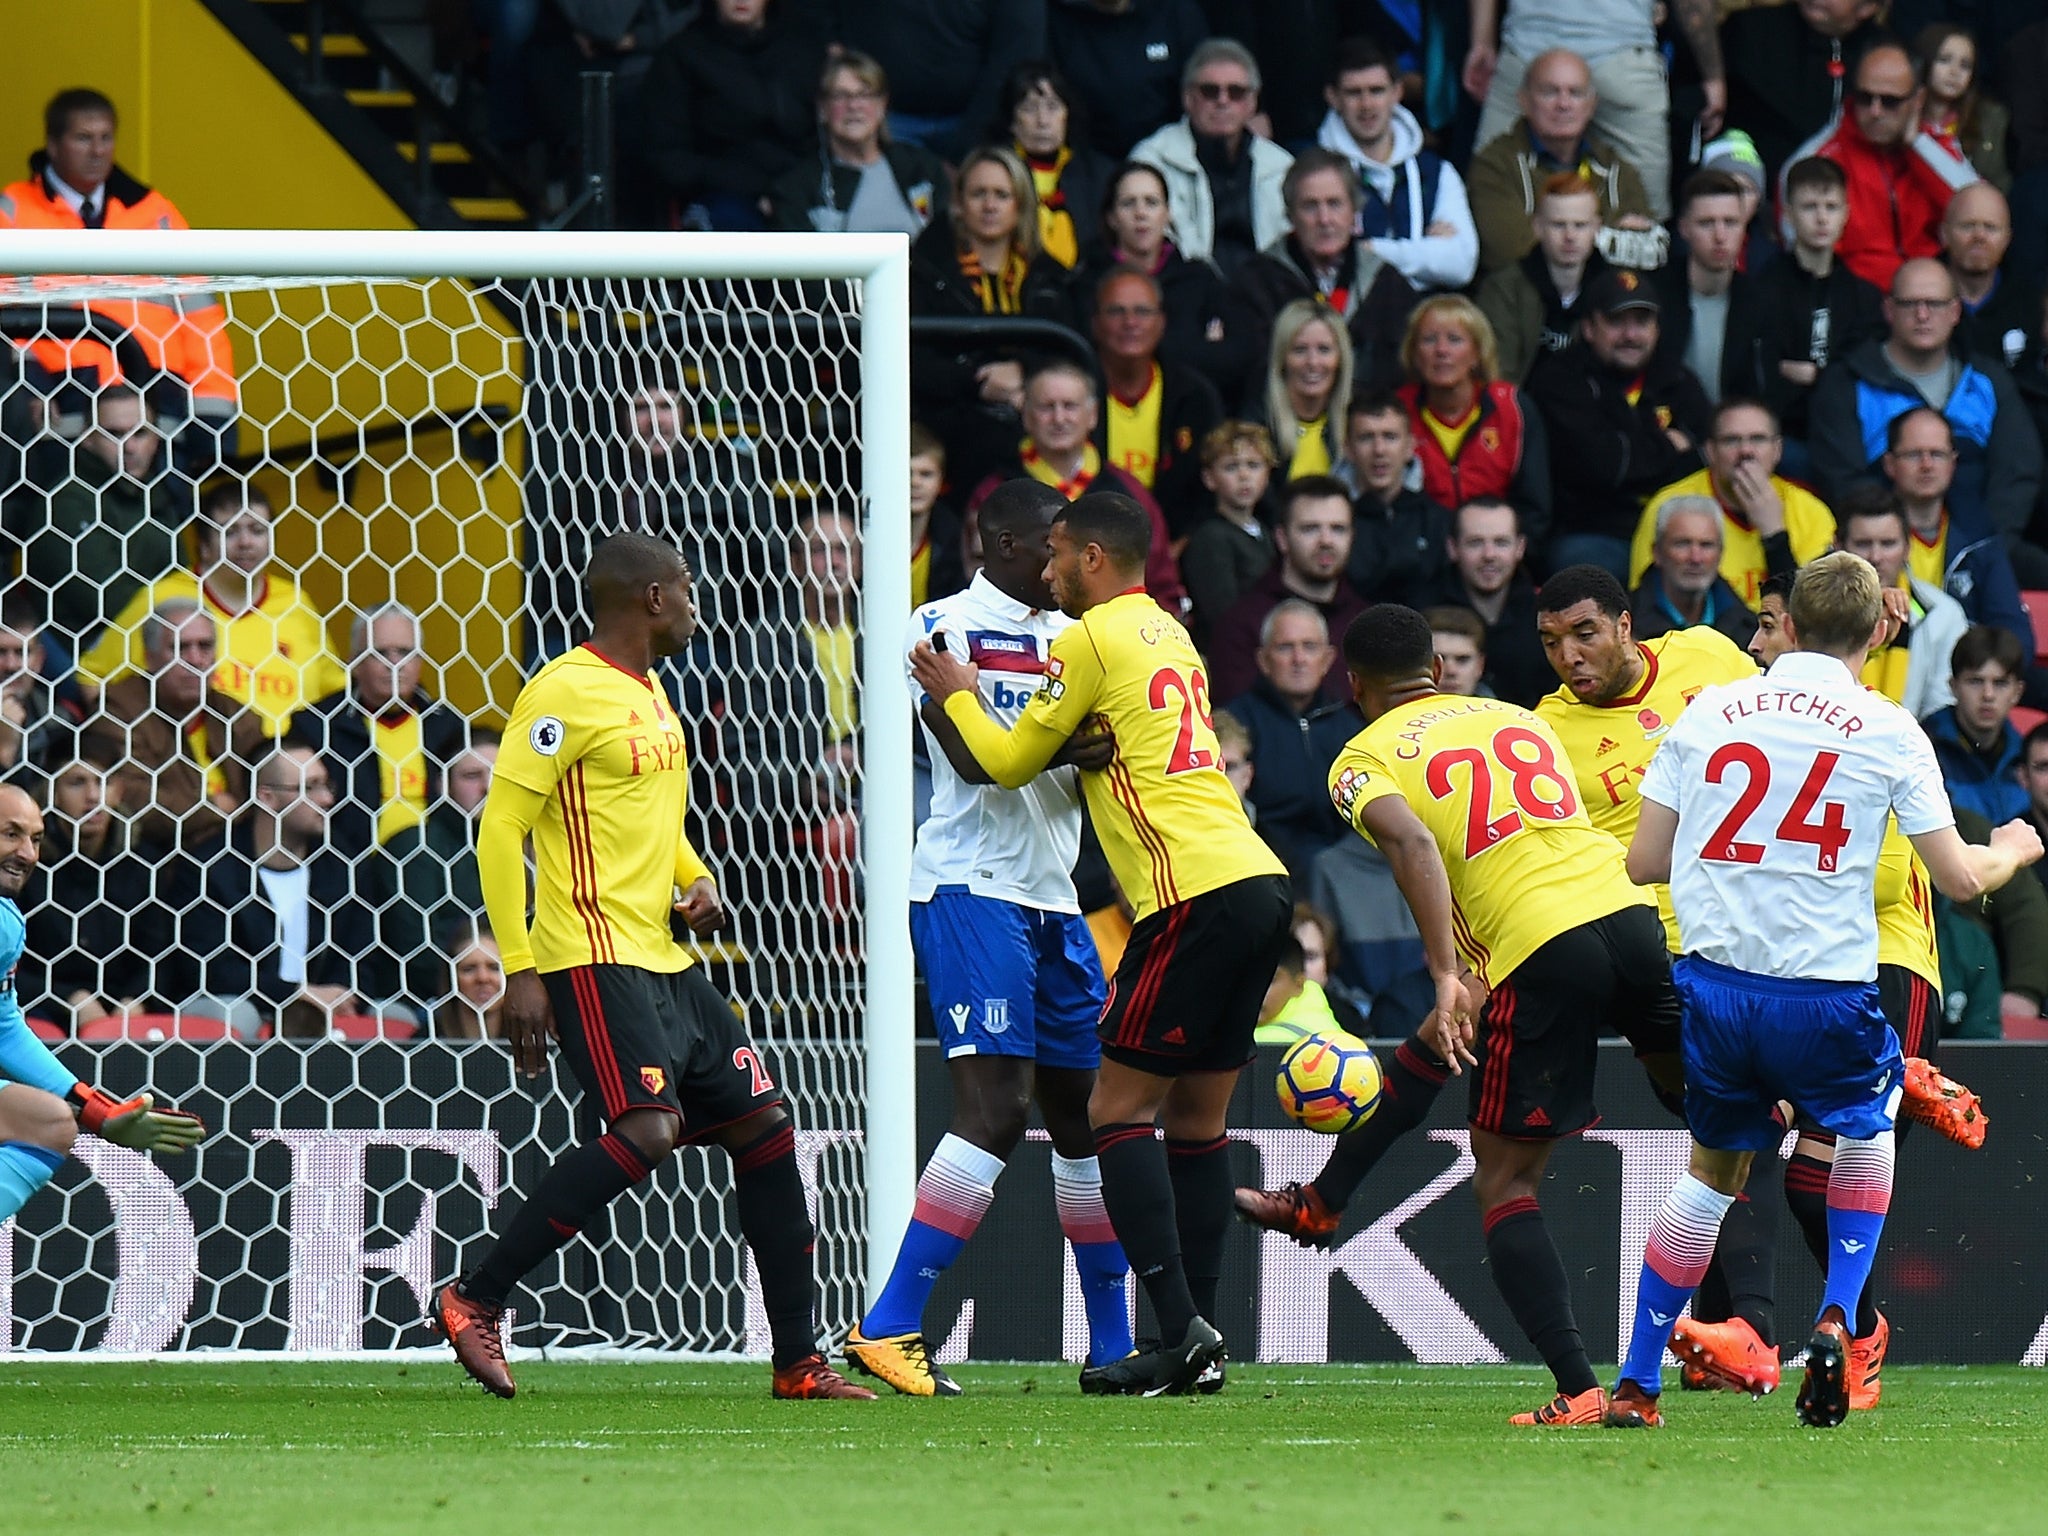 Darren Fletcher's goal gave Stoke their first away win of the season at Watford